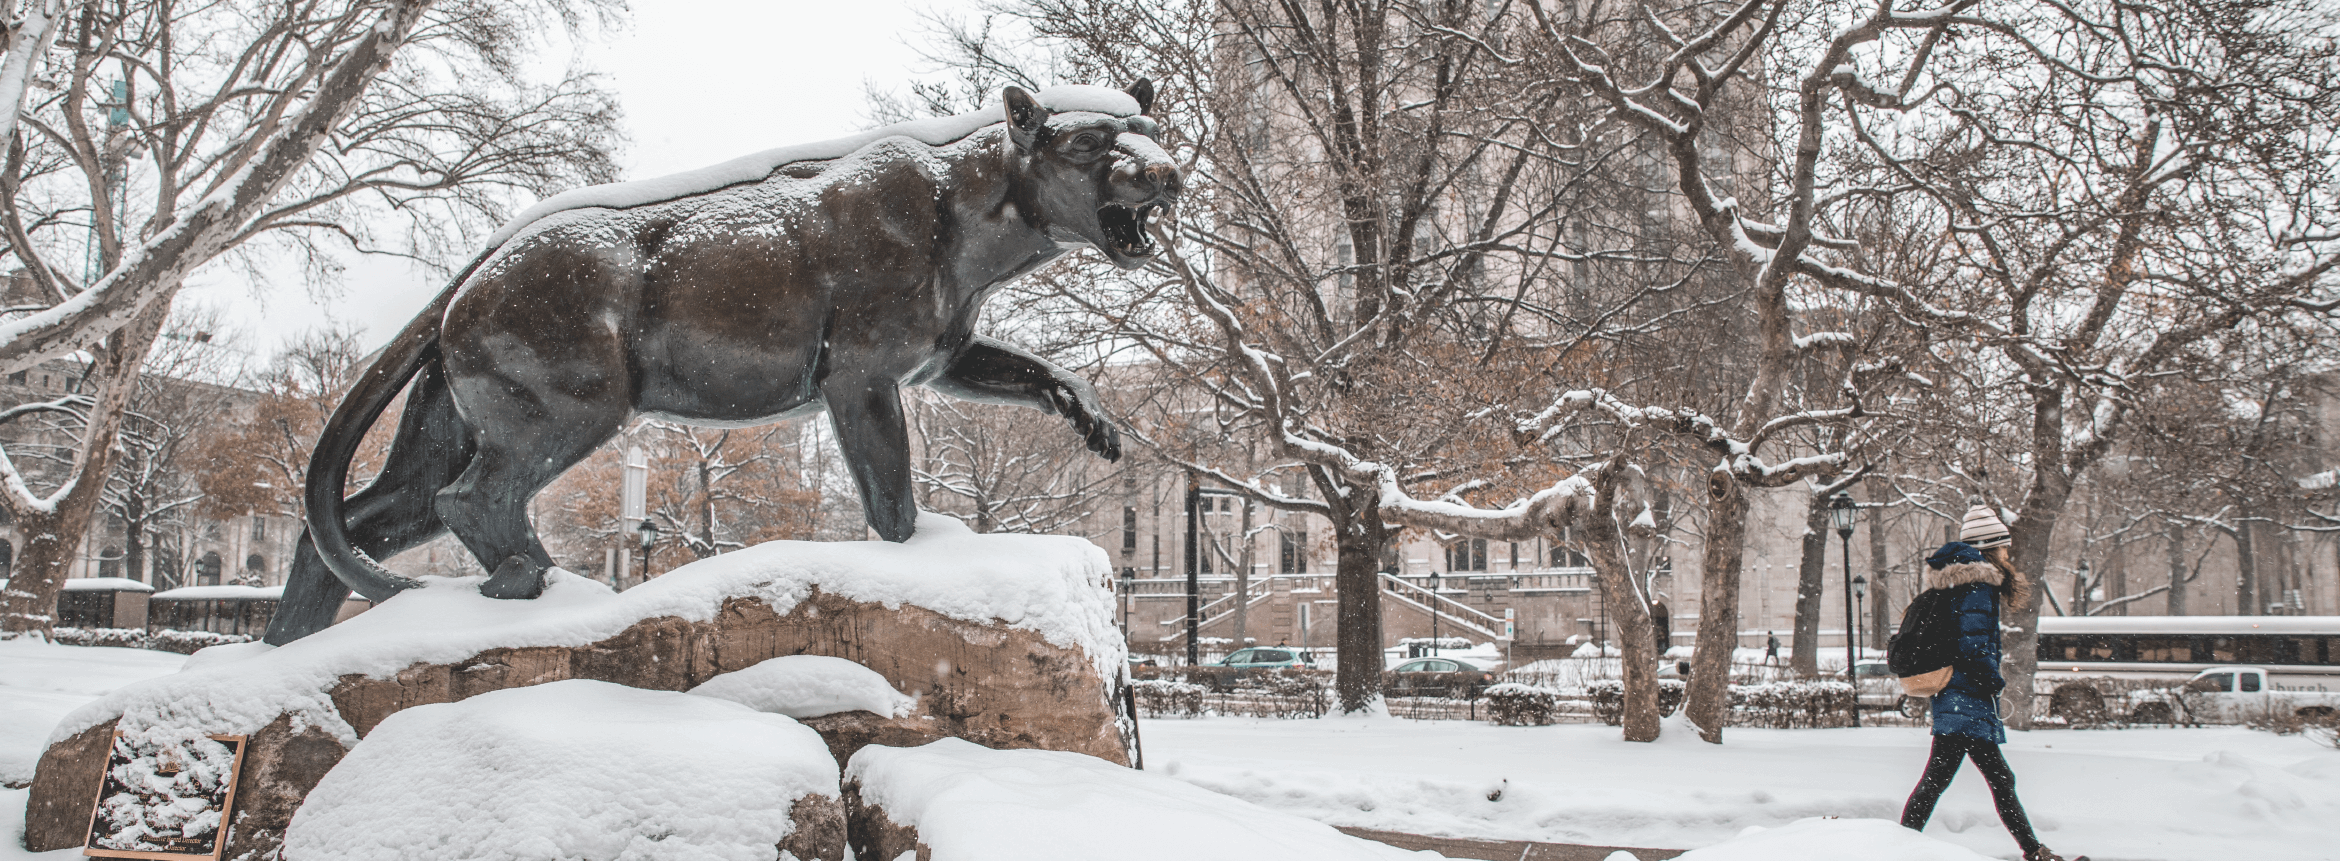 statue of pitt mascot covered in snow with pittsburgh campus in background